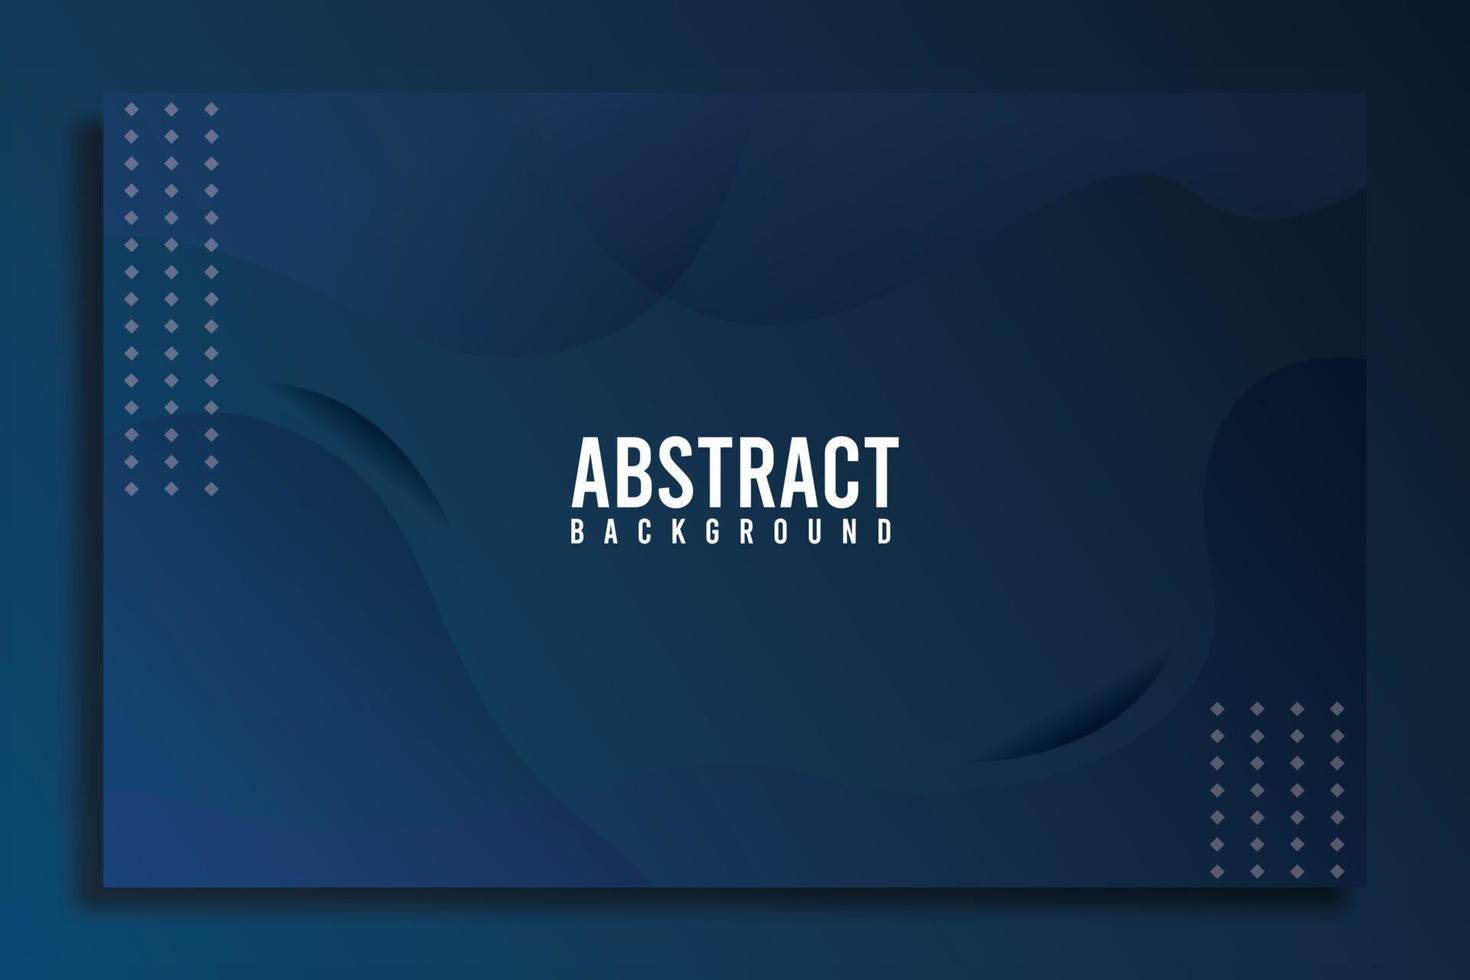 Dark blue background design template, design with abstract style, suitable for your business promotion and presentation background. vector